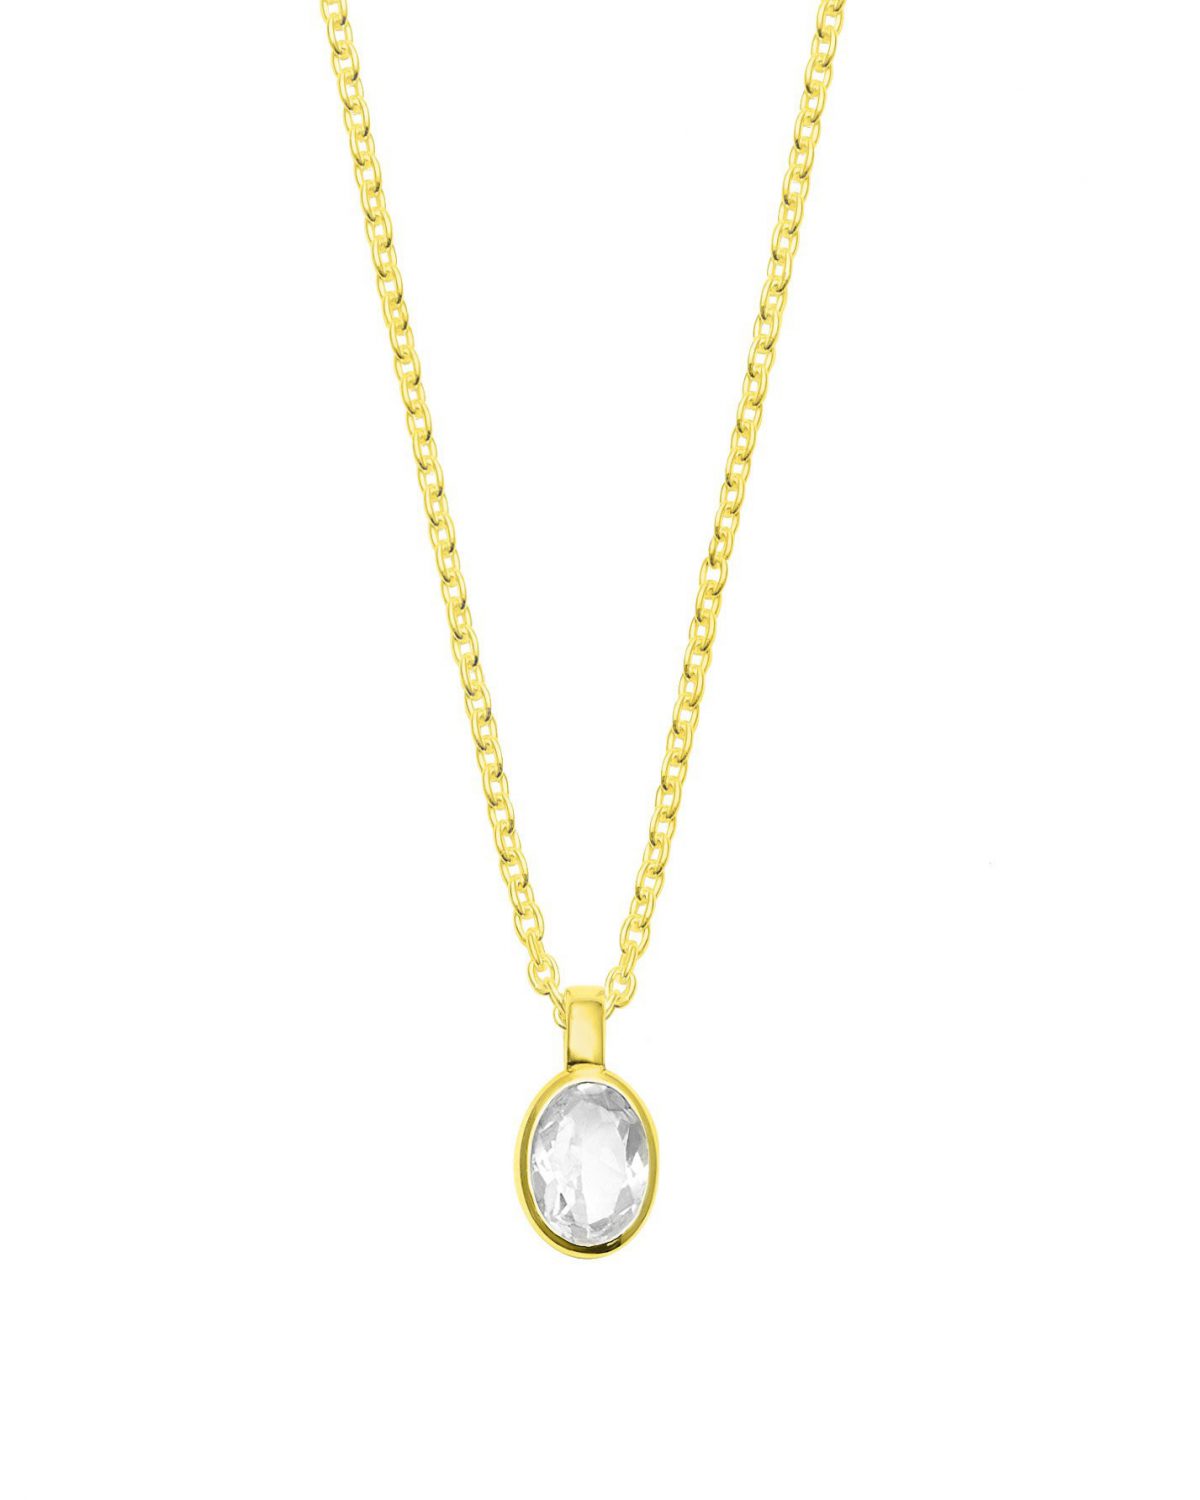 Ying Pendant Necklace, White Sapphire